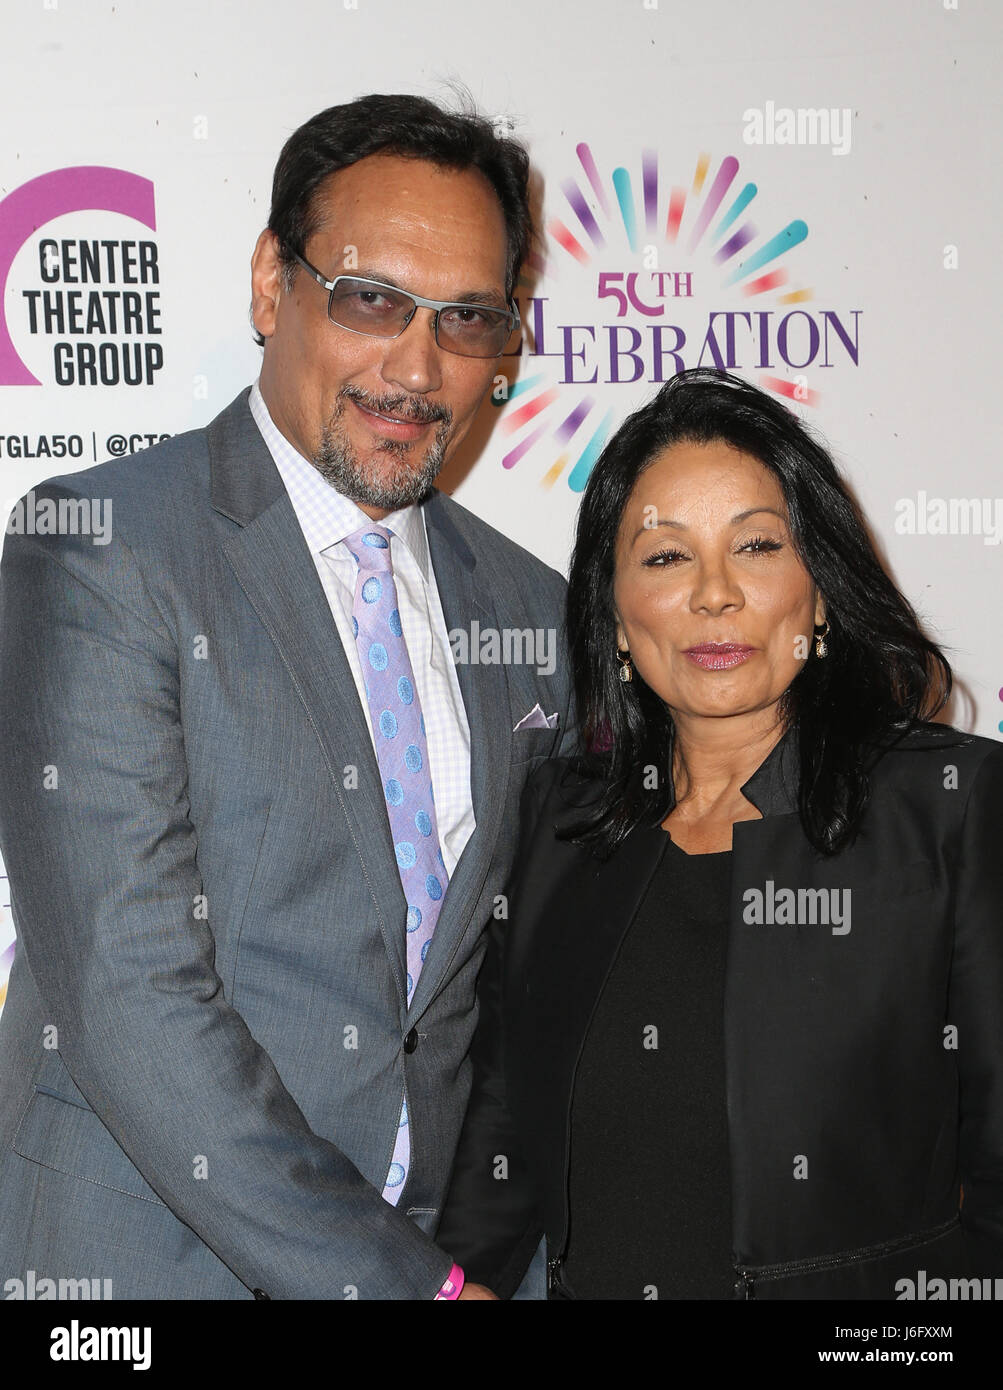 Los Angeles, Ca, USA. 20th May, 2017. Jimmy Smits, Wanda De Jesus, At Center Theatre Group's 50th Anniversary Celebration At Ahmanson Theatre In California on May 20, 2017. Credit: Fs/Media Punch/Alamy Live News Stock Photo